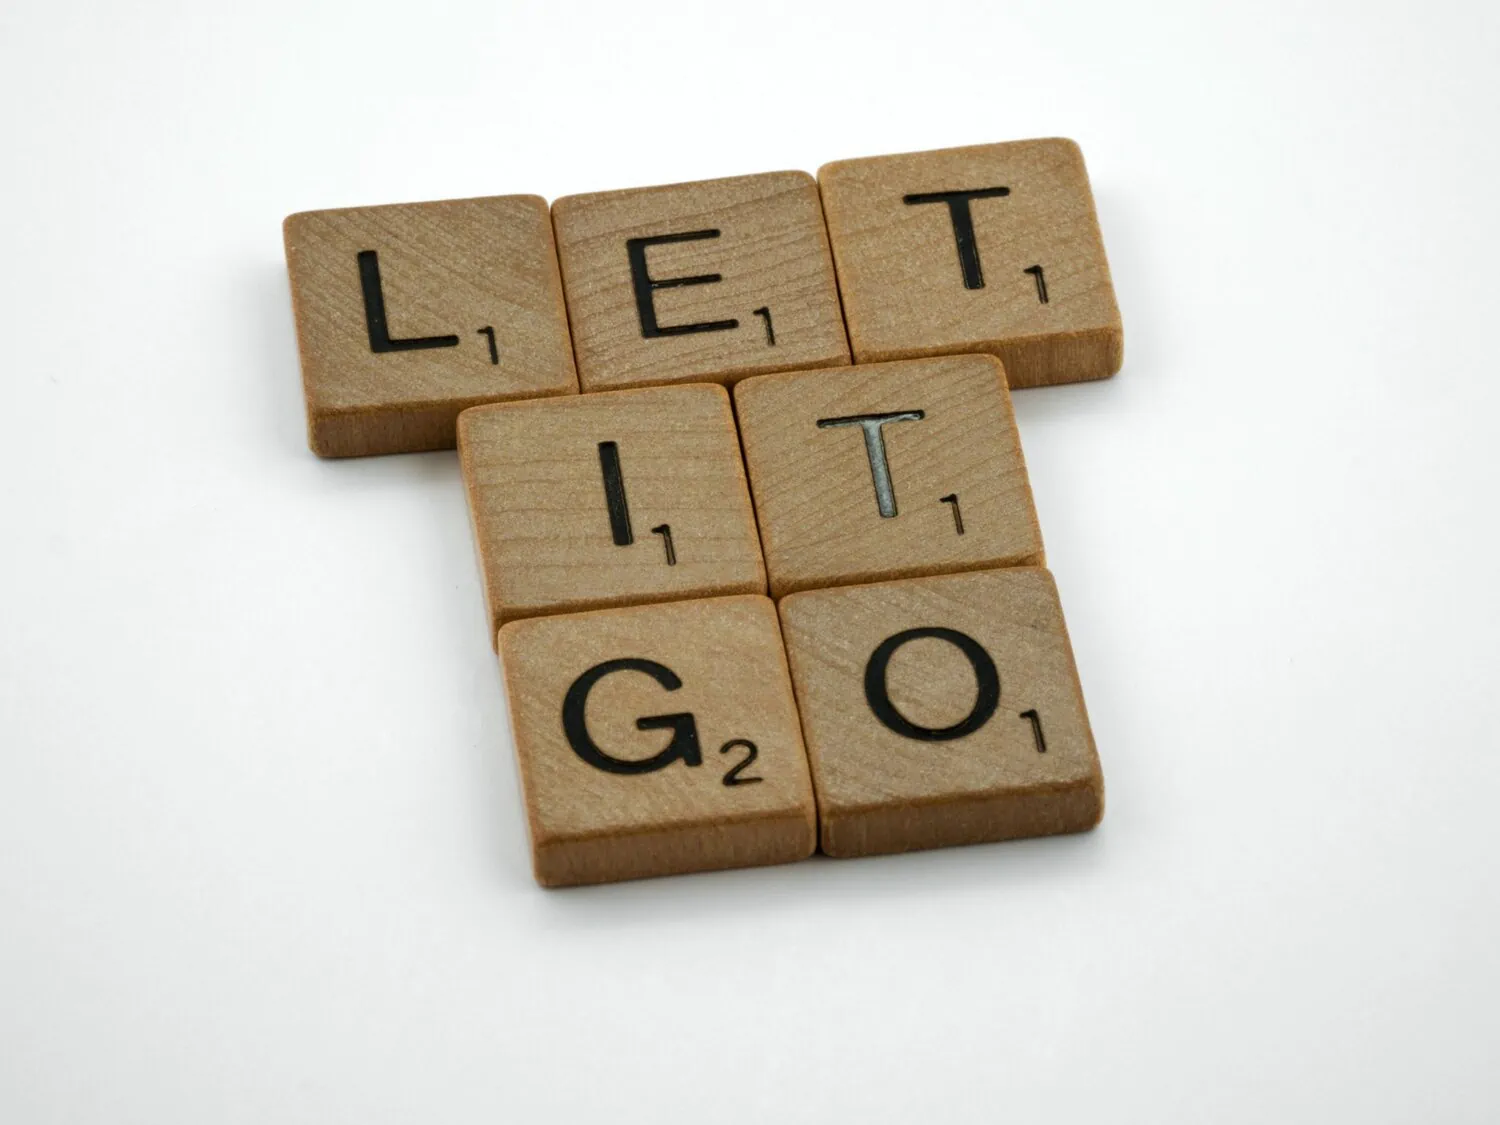 Scrabble letters spelling out let it go as a message for those wondering how to break emotional attachment to things